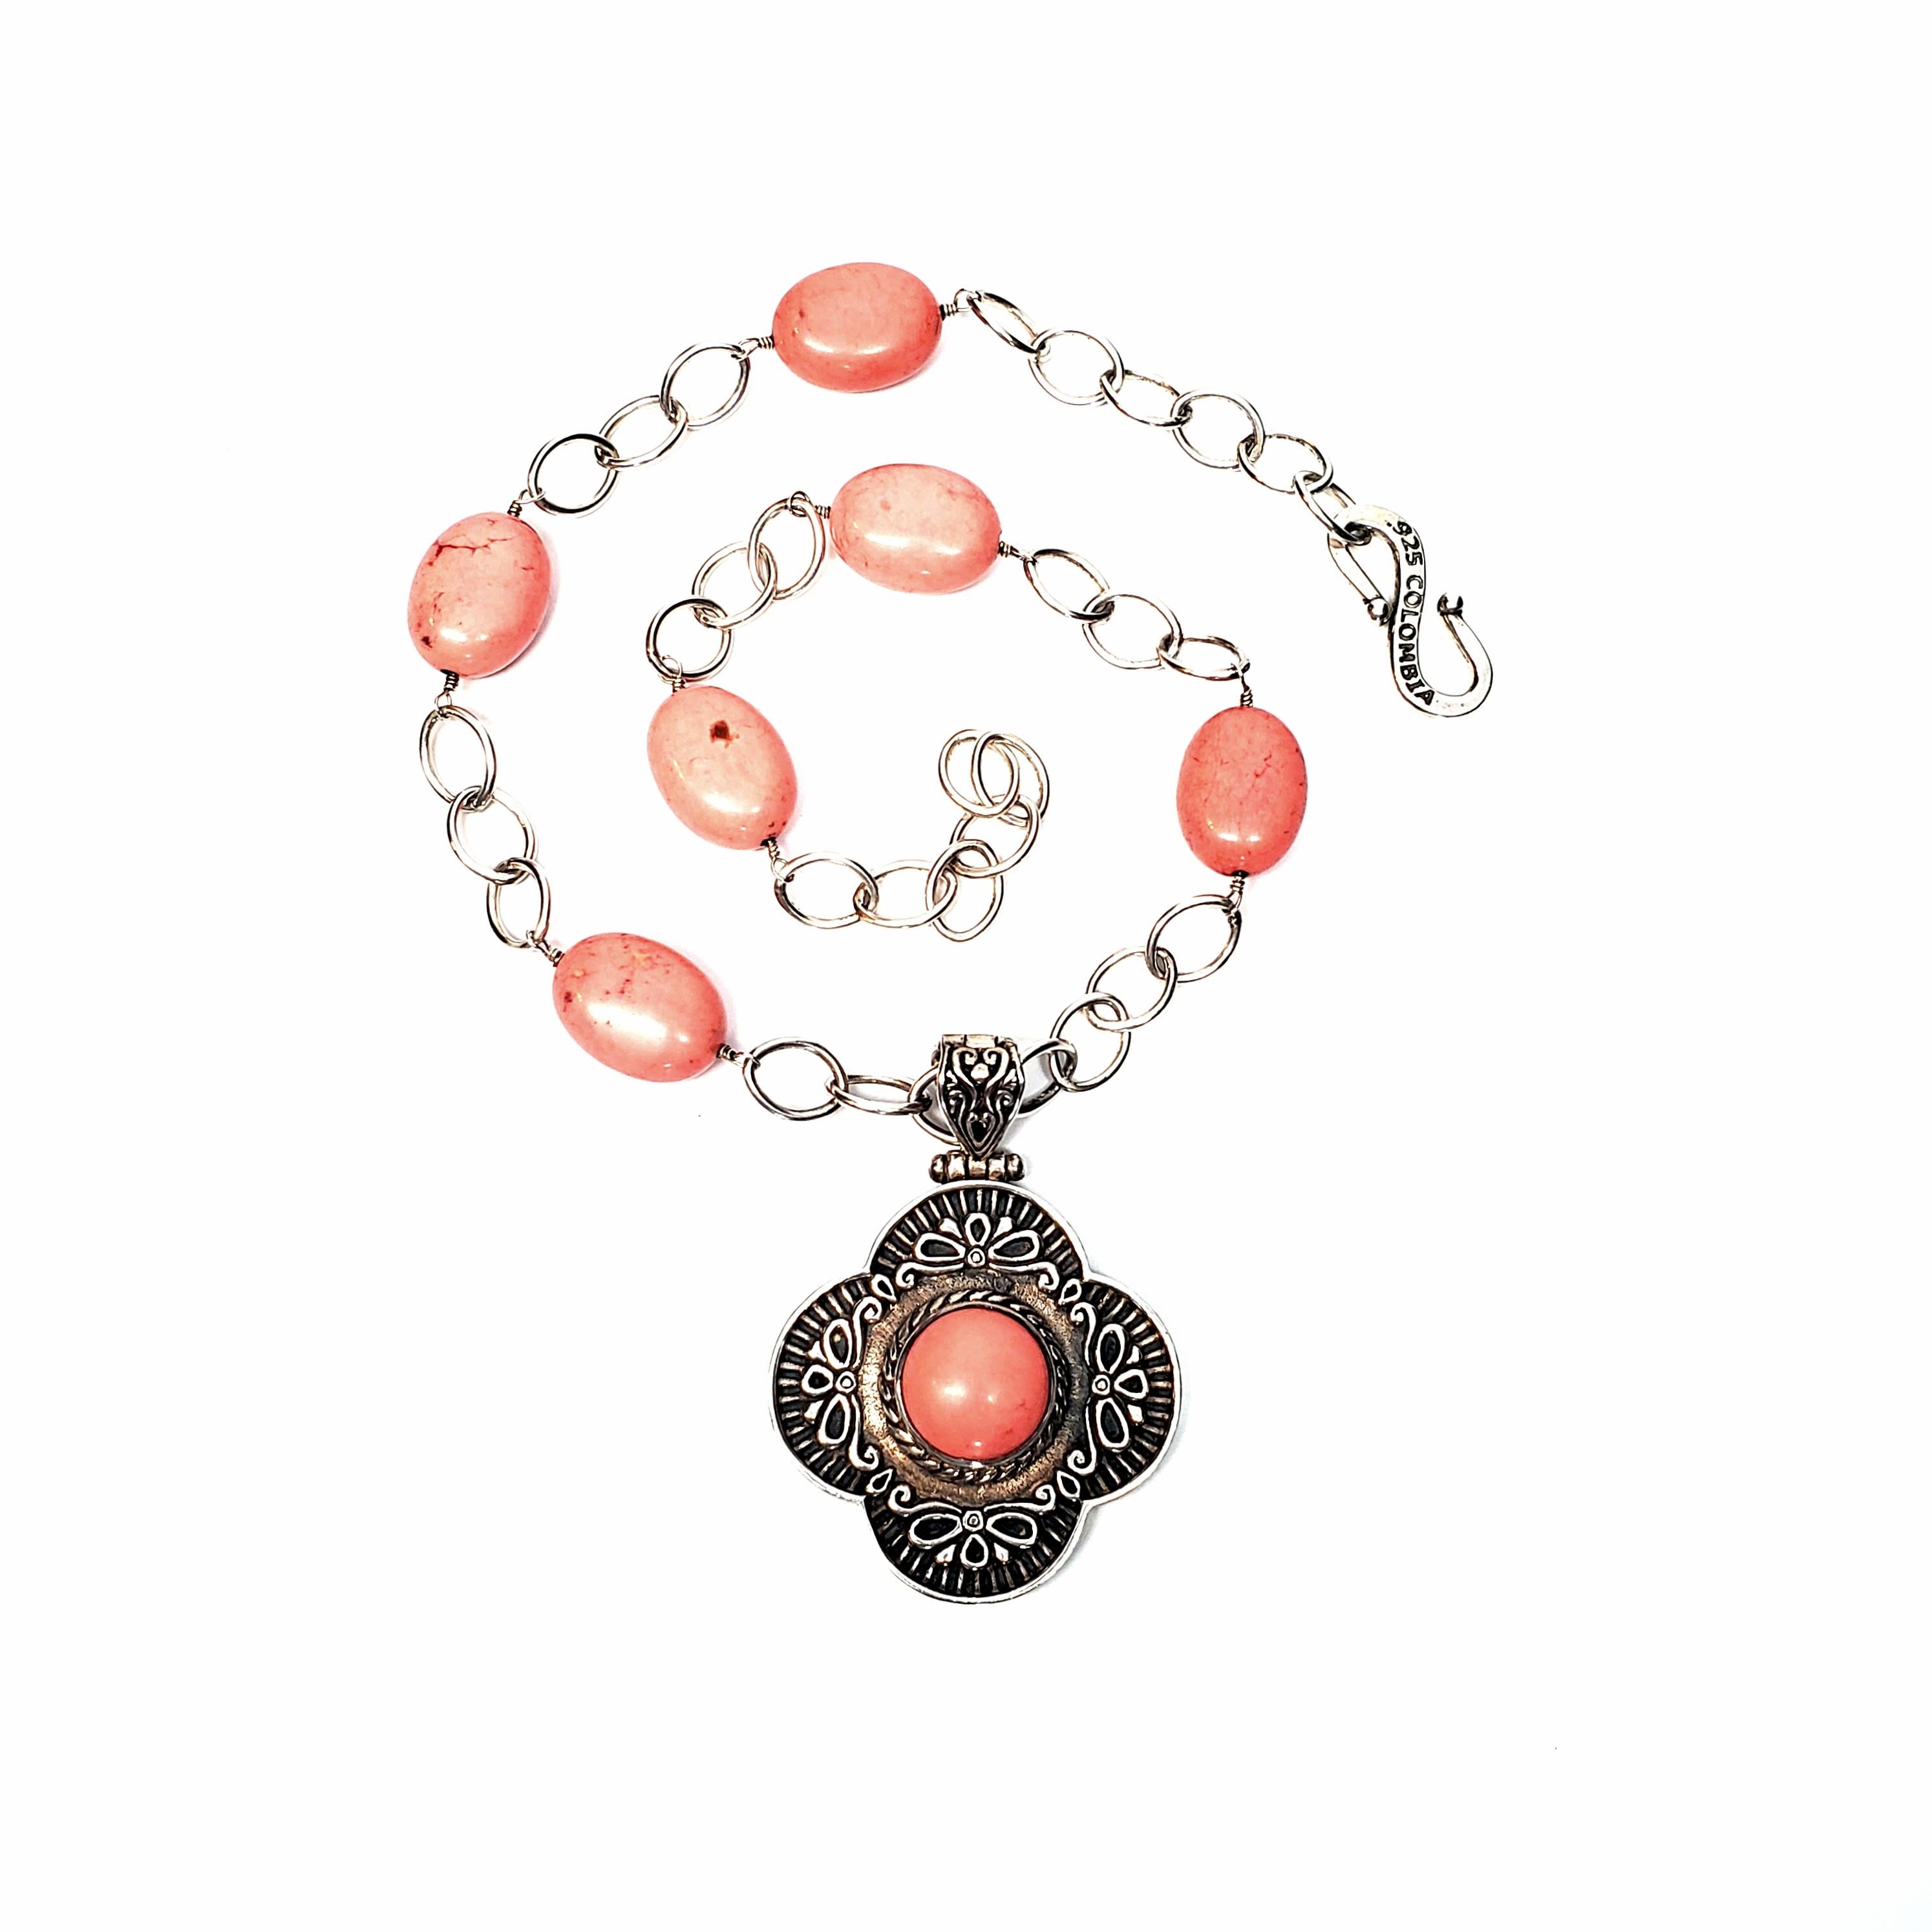 Claudia Agudelo EXEX Sterl Silver and Pink Stone Necklace with Enhancer 2